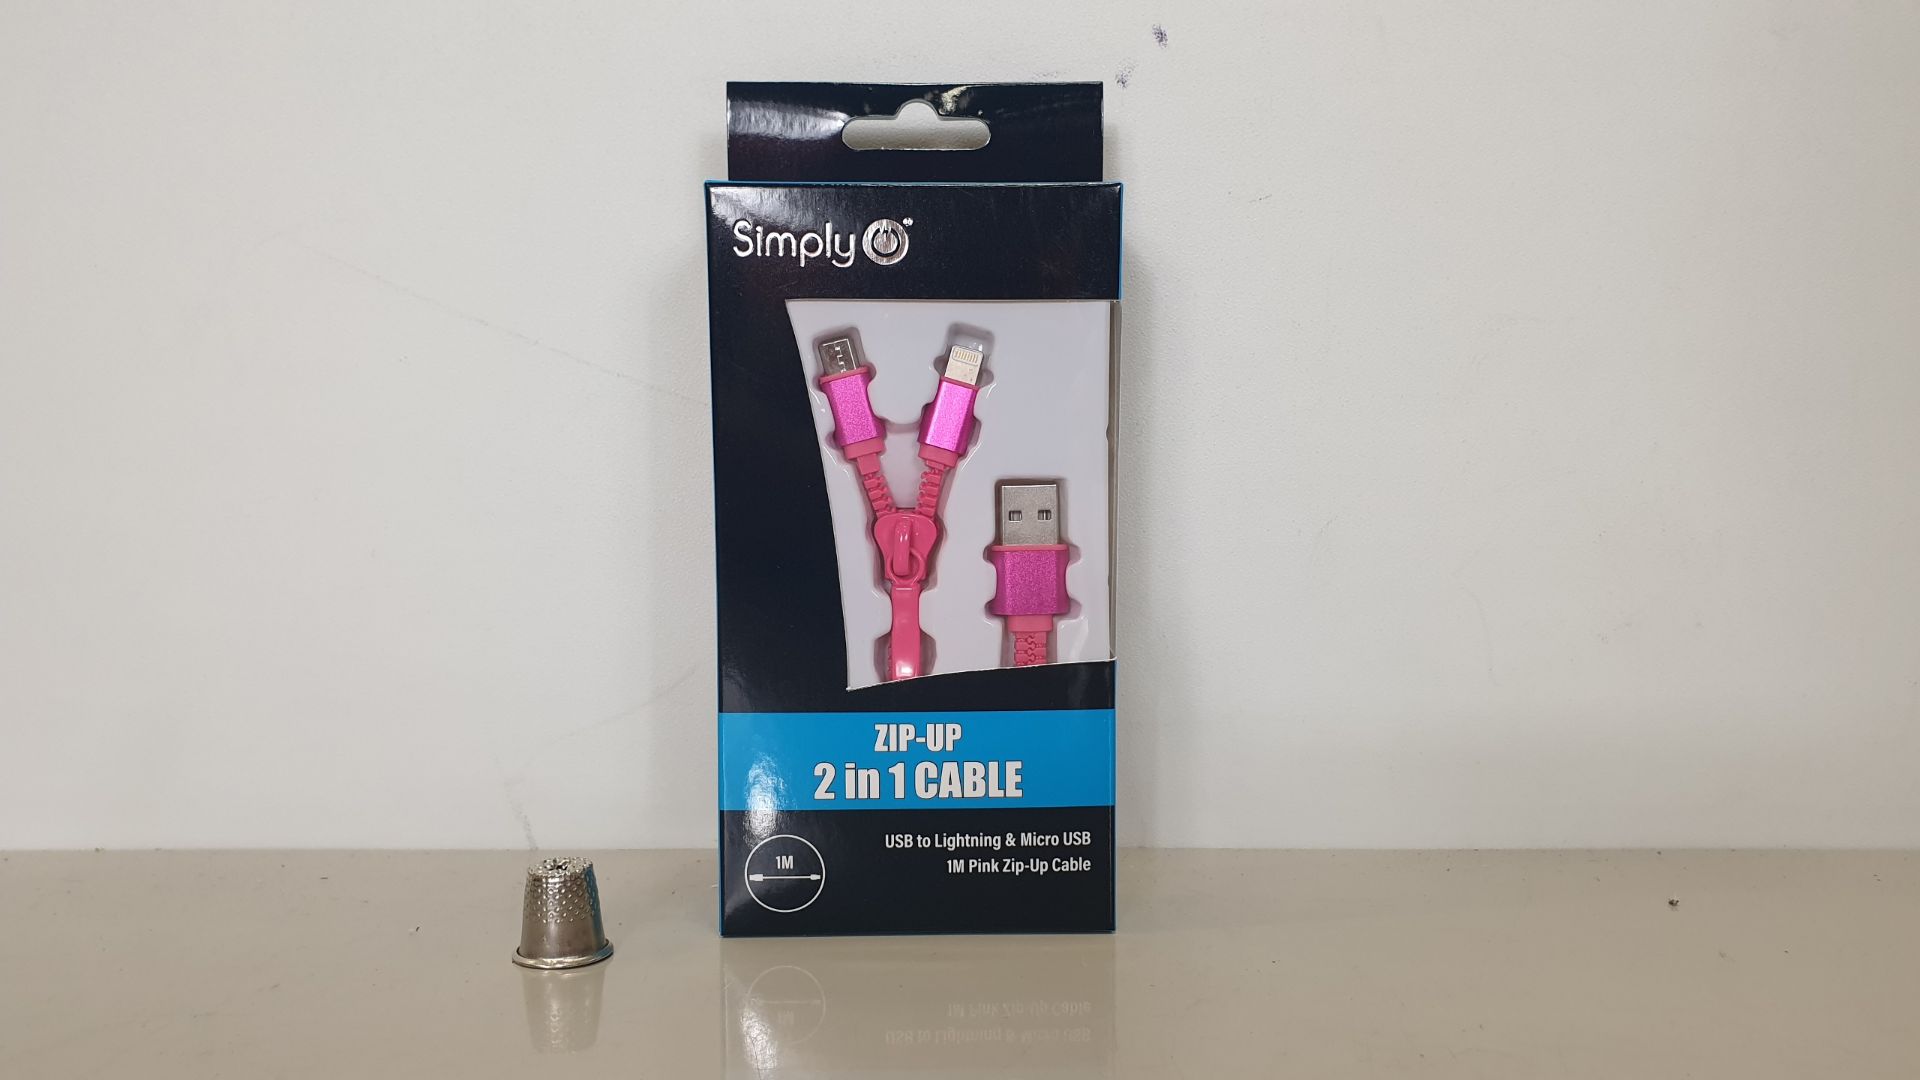 200 X BRAND NEW SIMPLY ZIP-UP 2 IN 1 CABLE - USB TO LIGHTNING & MICRO USB 1M PINK ZIP UP CABLE IN